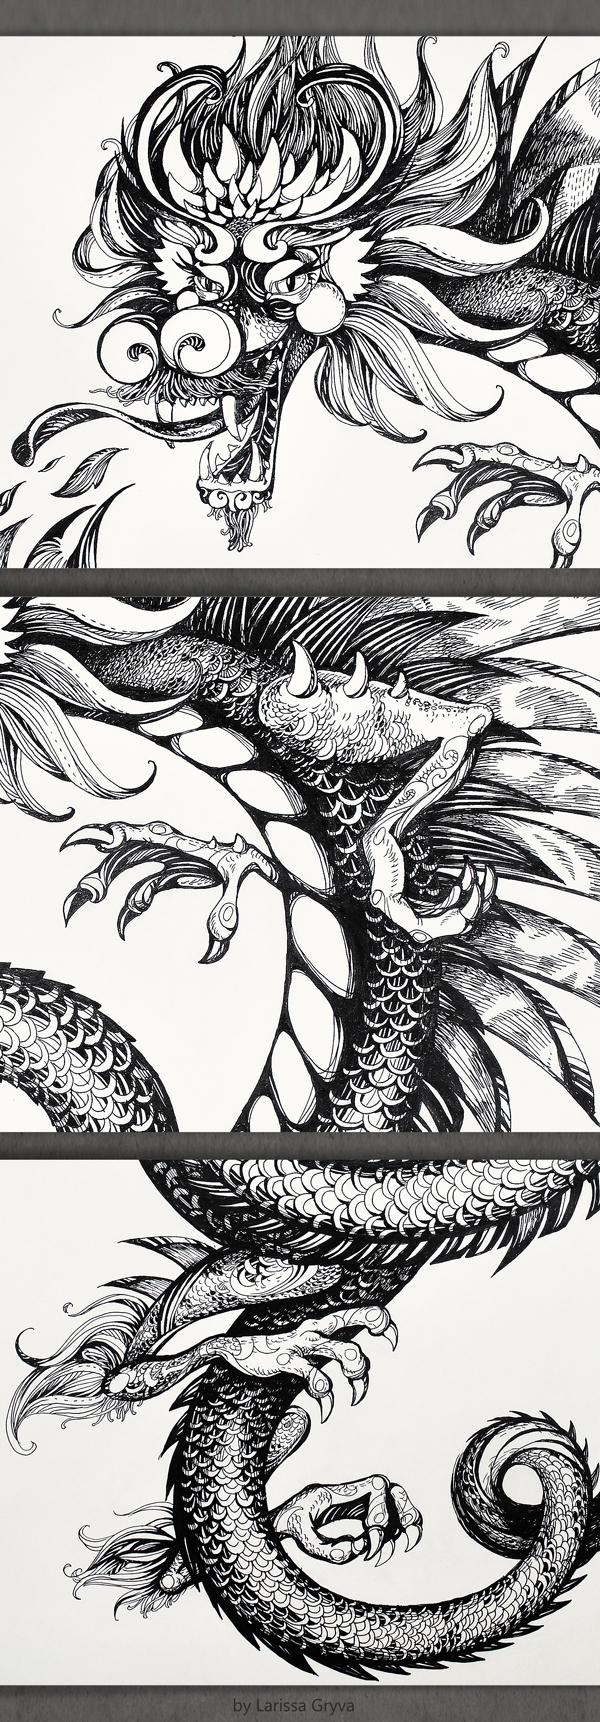 dragon dragons illustrations paper line lines black White Black&white hand drawing design cup plate iphone ornamental decorative art skin black and white hand made chinese graphic arts graphics